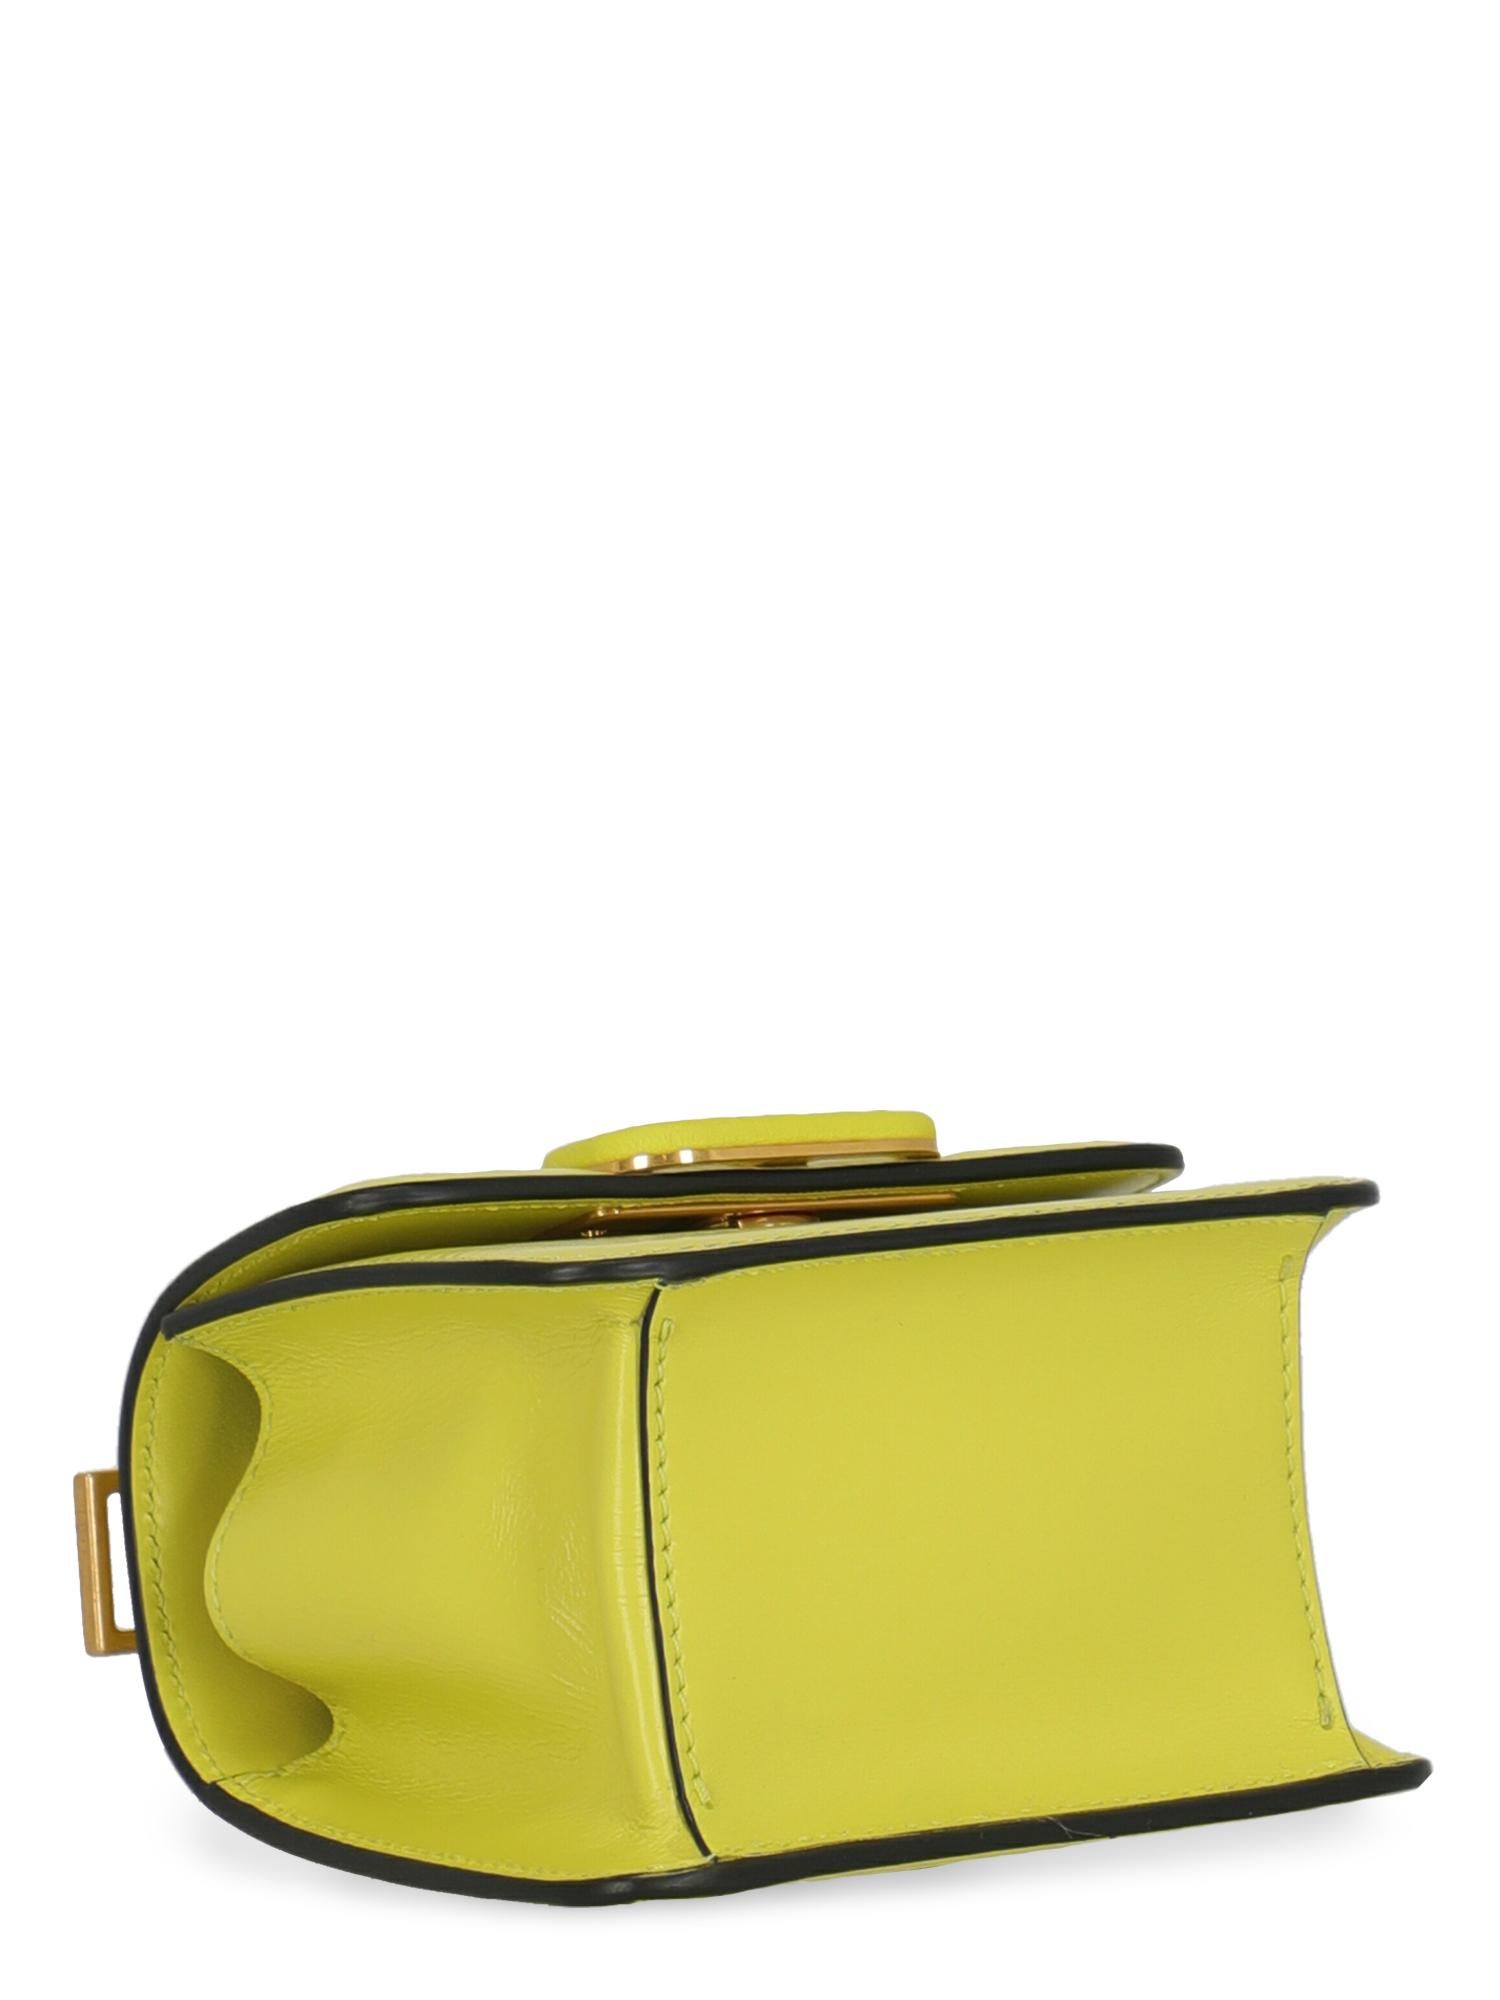 Valentino Women Shoulder bags Yellow Leather  In Excellent Condition For Sale In Milan, IT